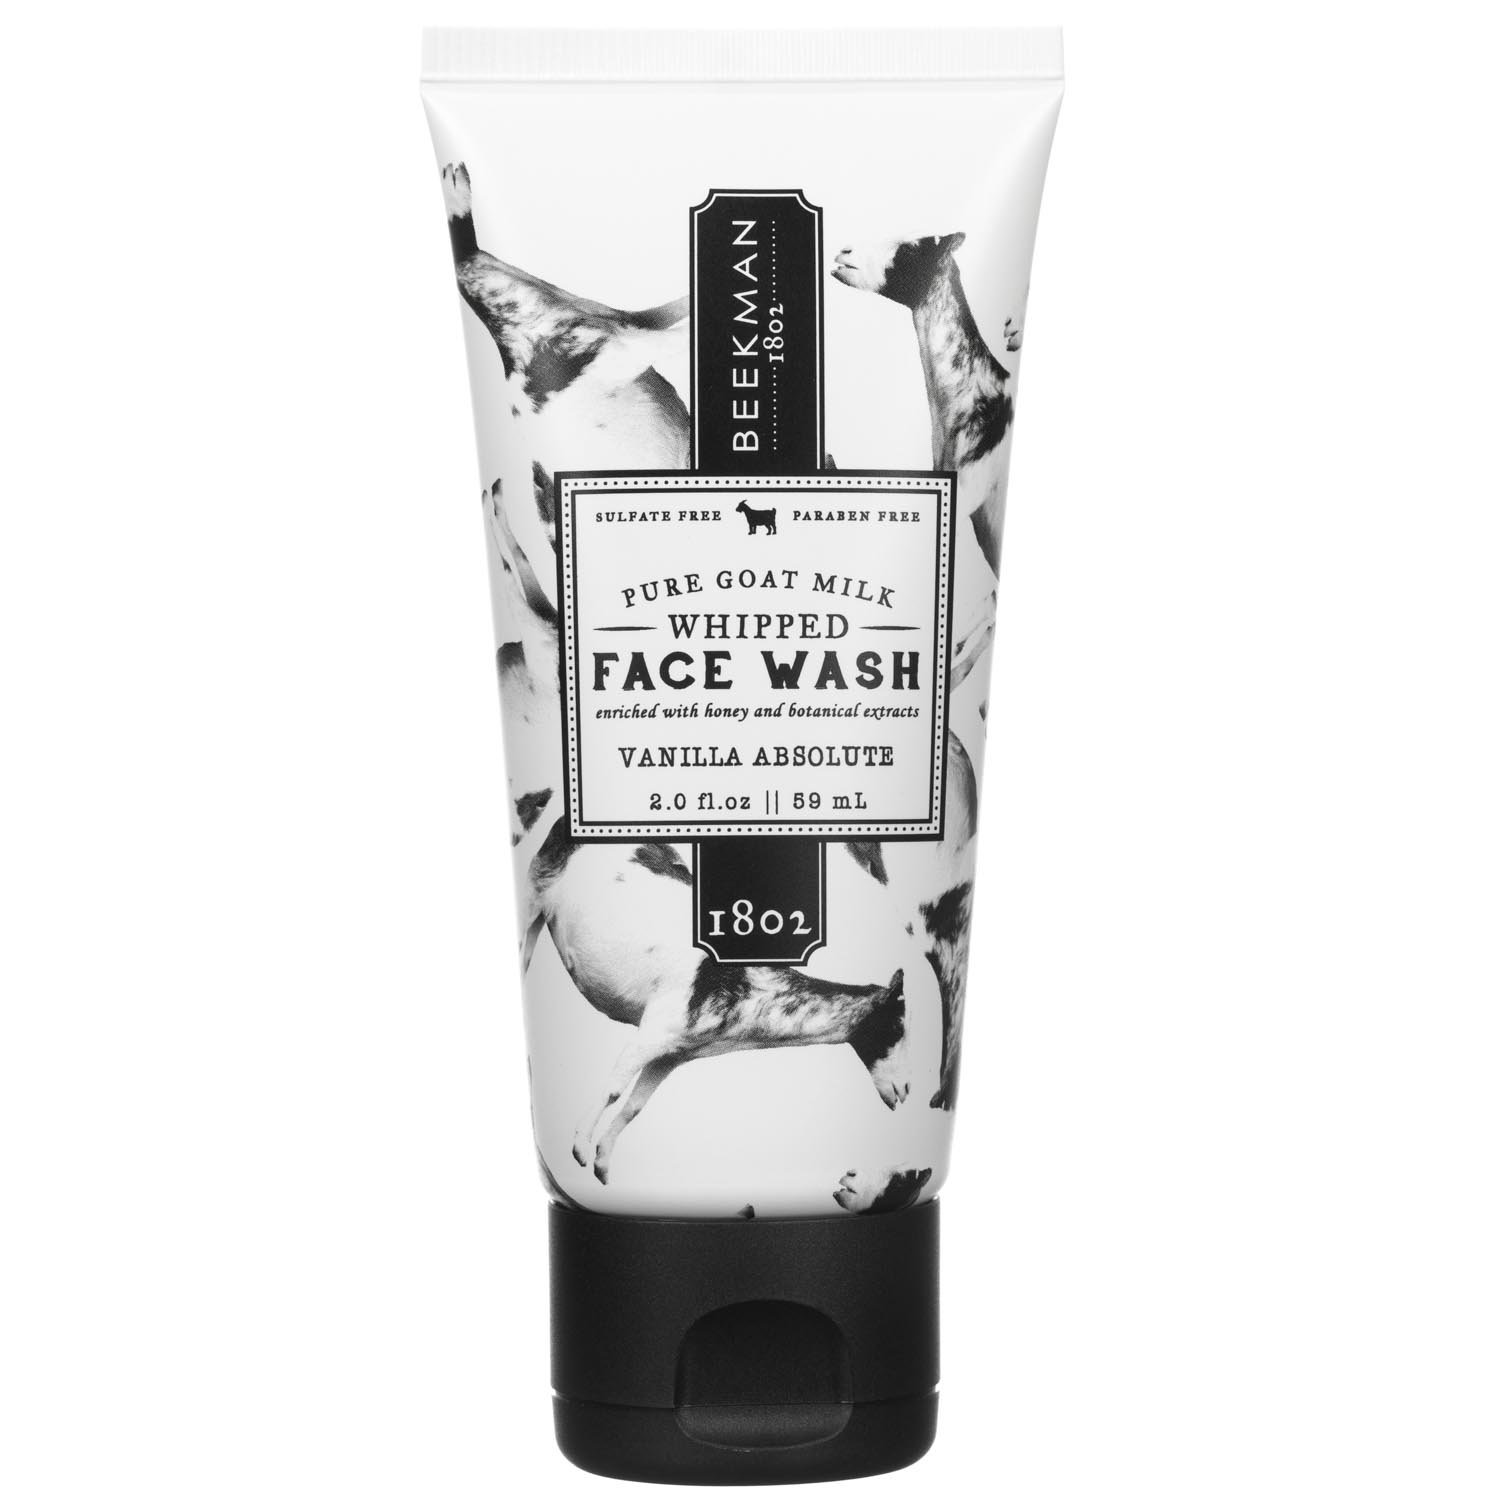 Vanilla Absolute Whipped Face Wash